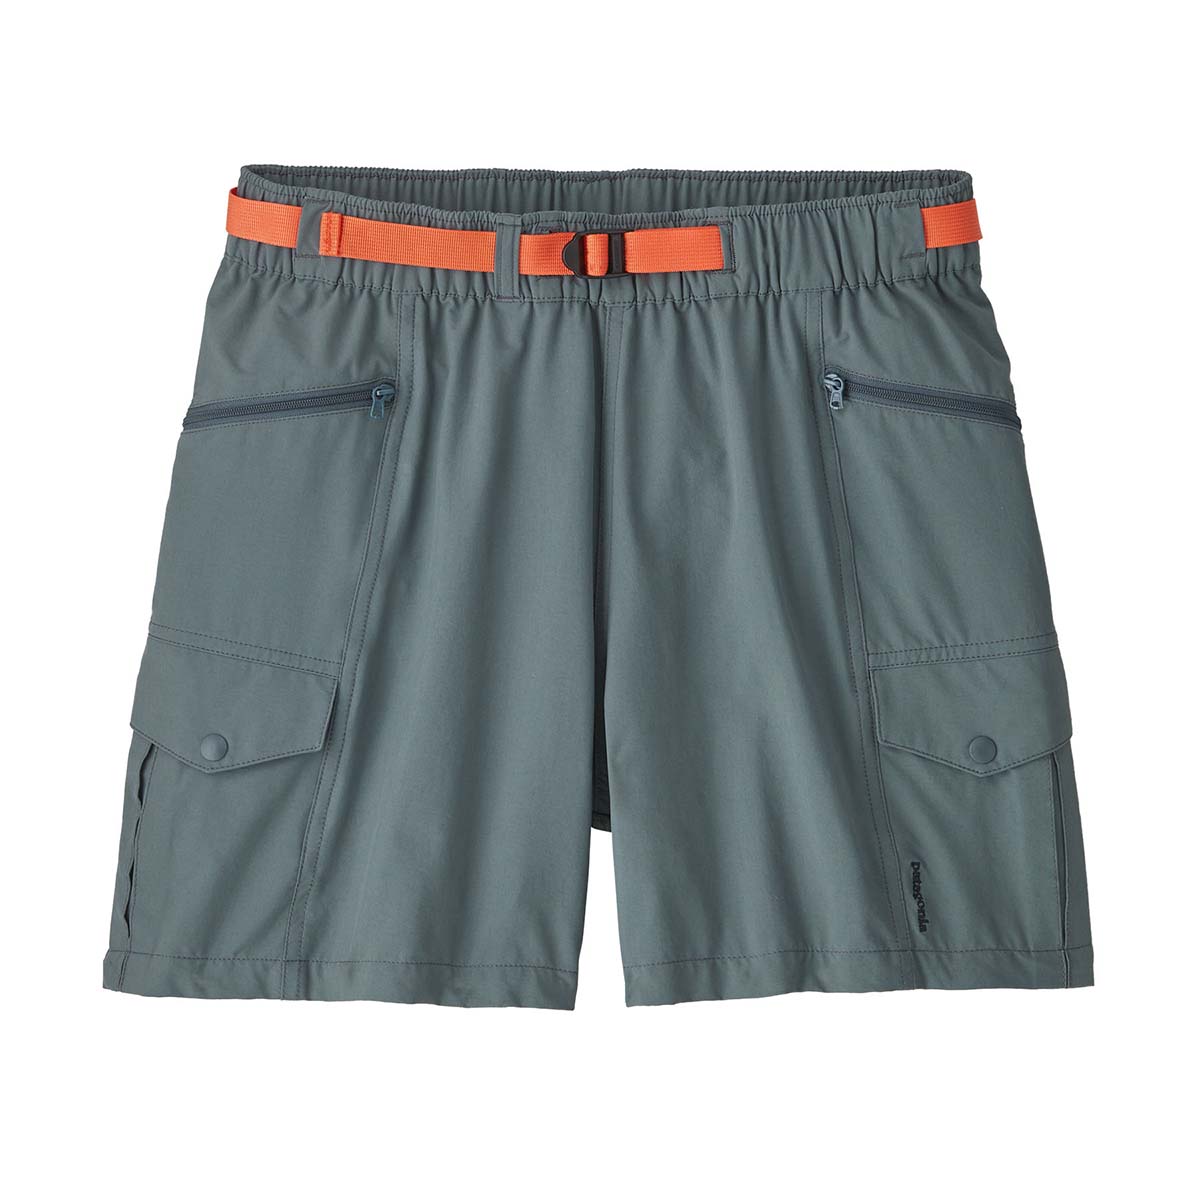 Patagonia Women's Outdoor Everyday Shorts 4"